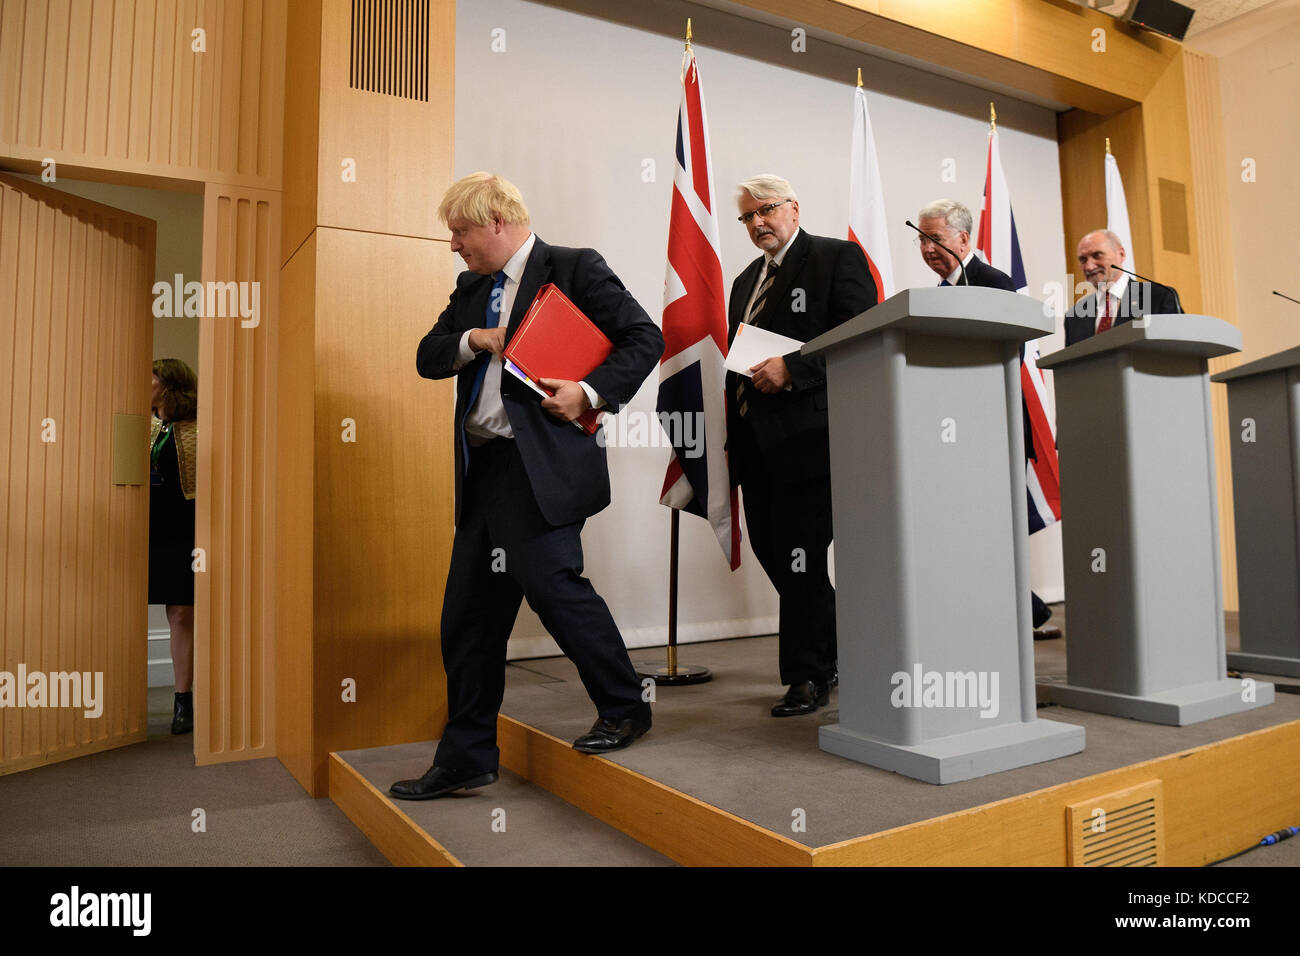 (left to right) Foreign Secretary Boris Johnson, Poland's Foreign Minister Witold Waszczykowksi, Defence Secretary Sir Michael Fallon and Polish Defence Minister Antoni Macierewicz, leave following a joint press conference at the Foreign & Commonwealth Office in London. Stock Photo